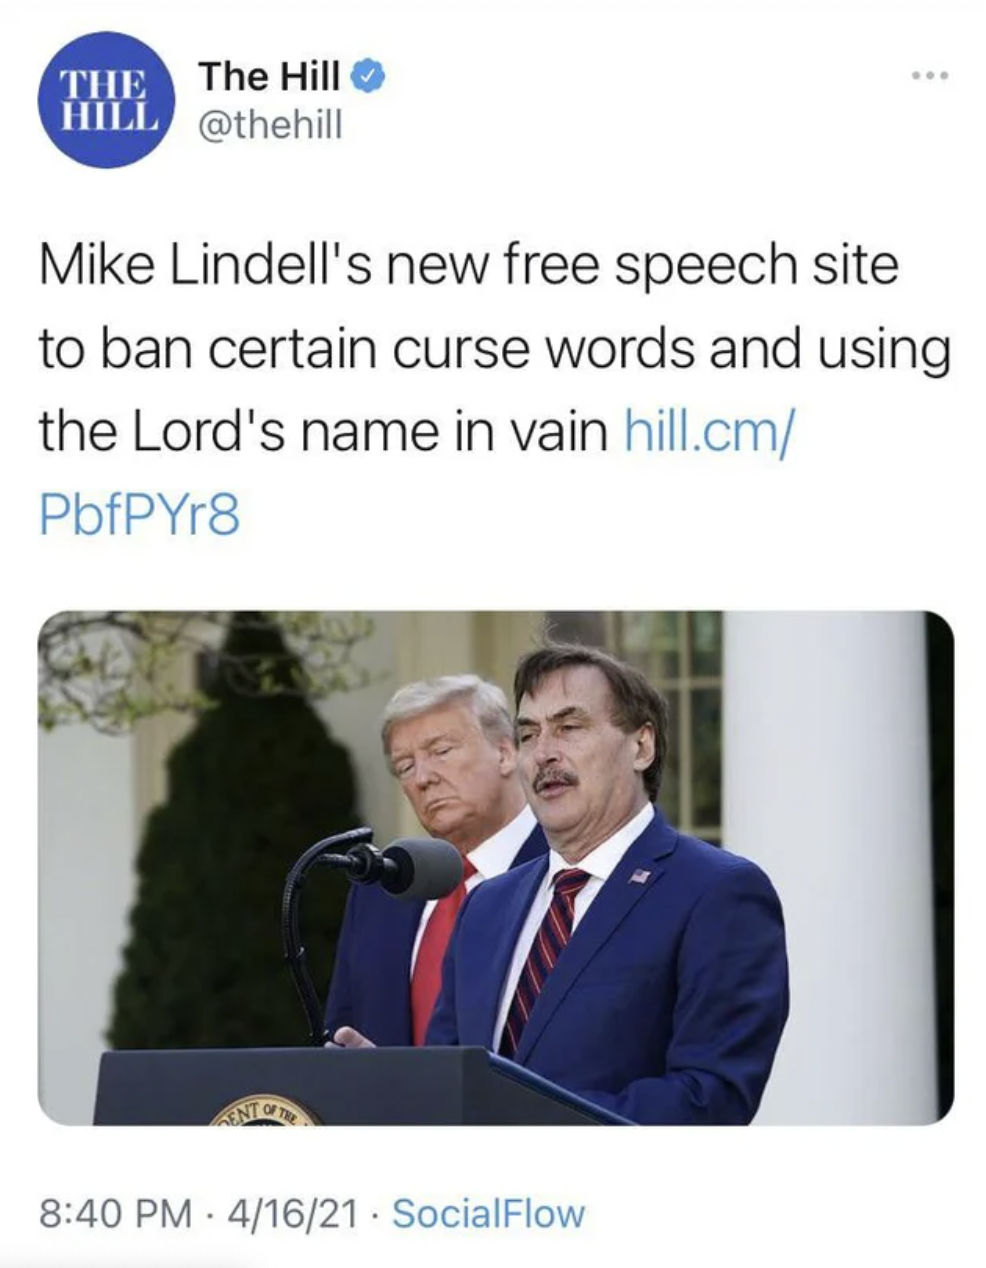 Funny facepalms - conversation - The The Hill Hill Mike Lindell's new free speech site to ban certain curse words and using the Lord's name in vain